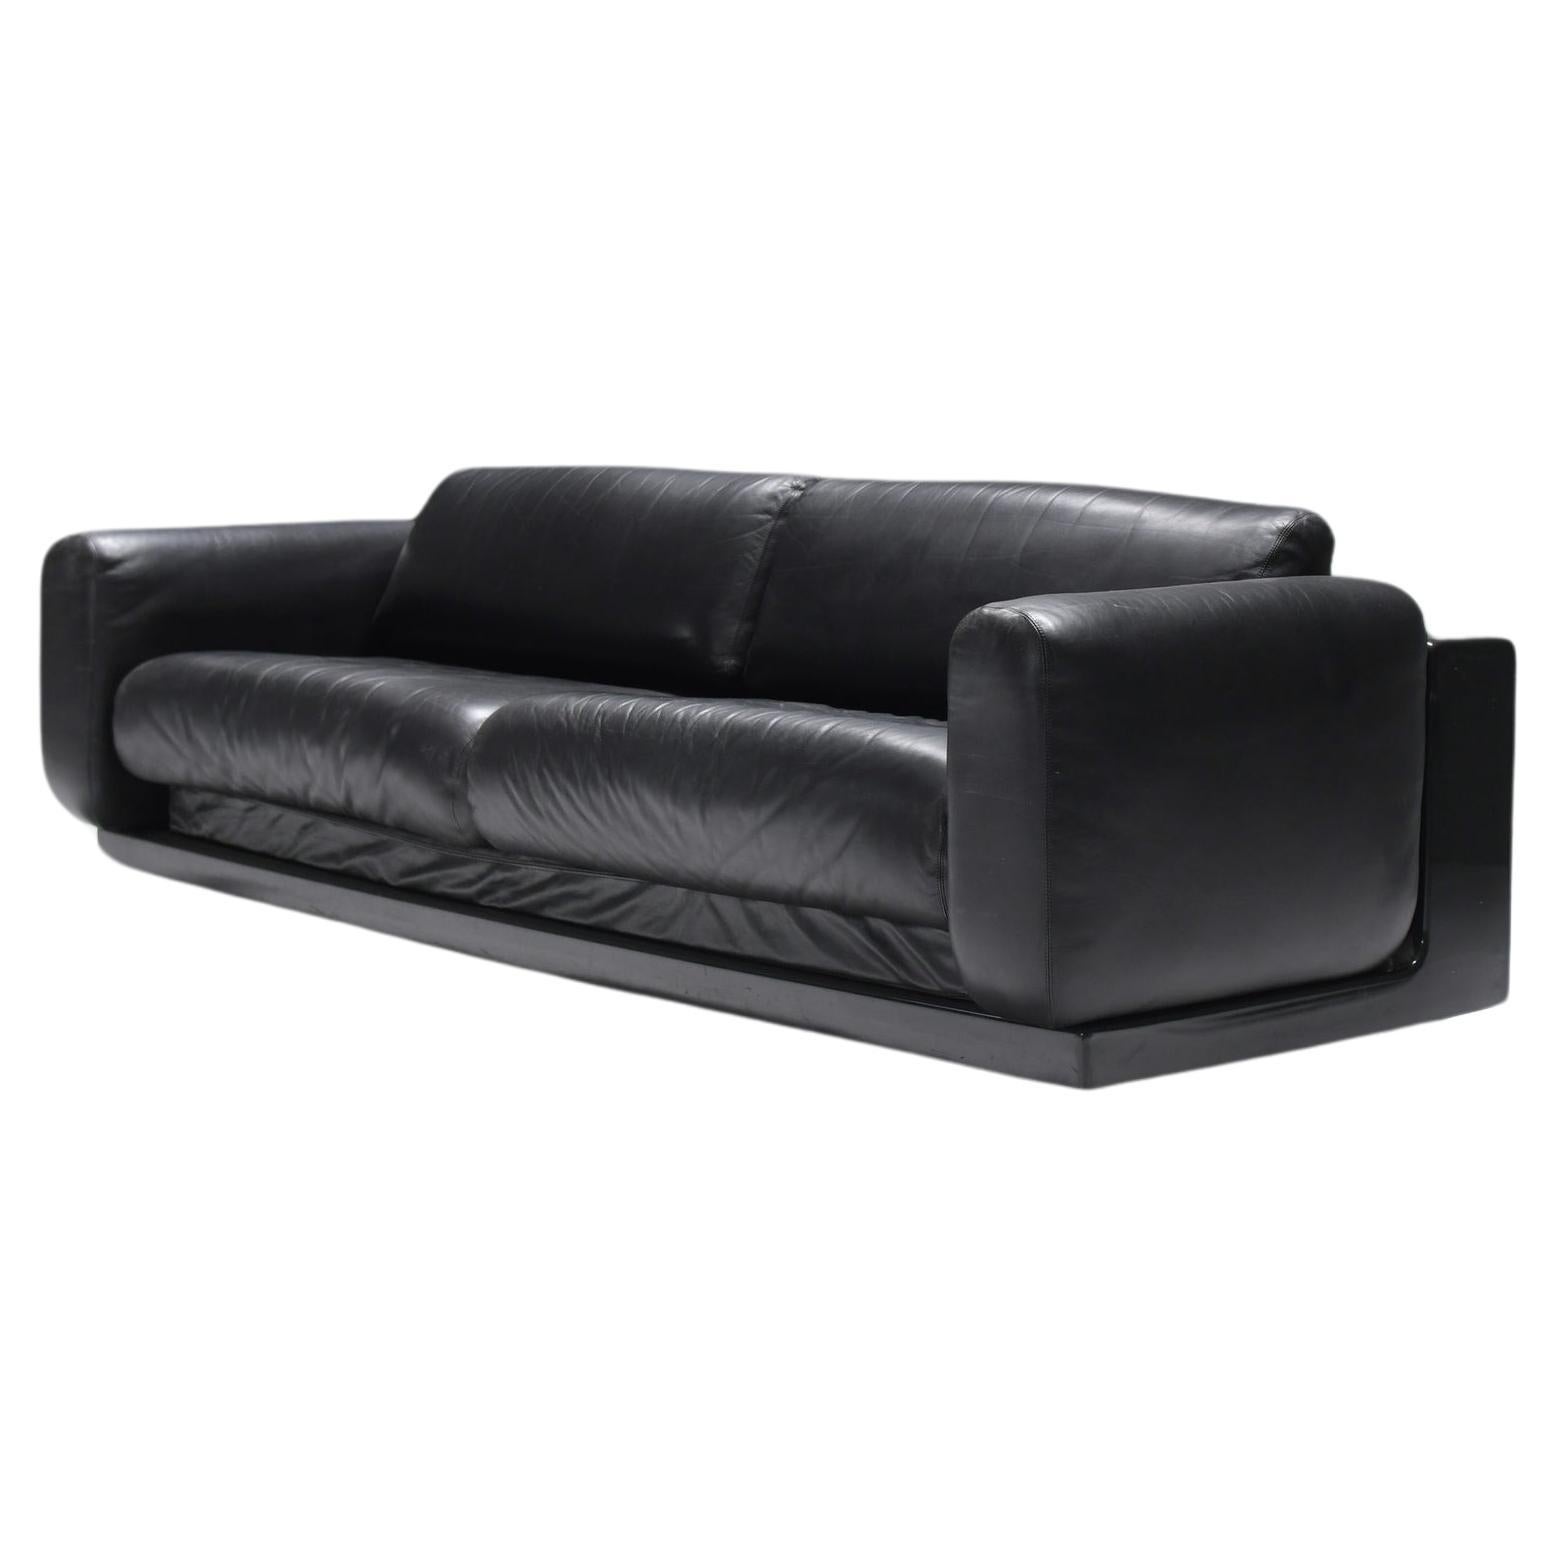 Rare Vintage Gradual lounge sofa in black leather by Cini Boeri for Knoll For Sale